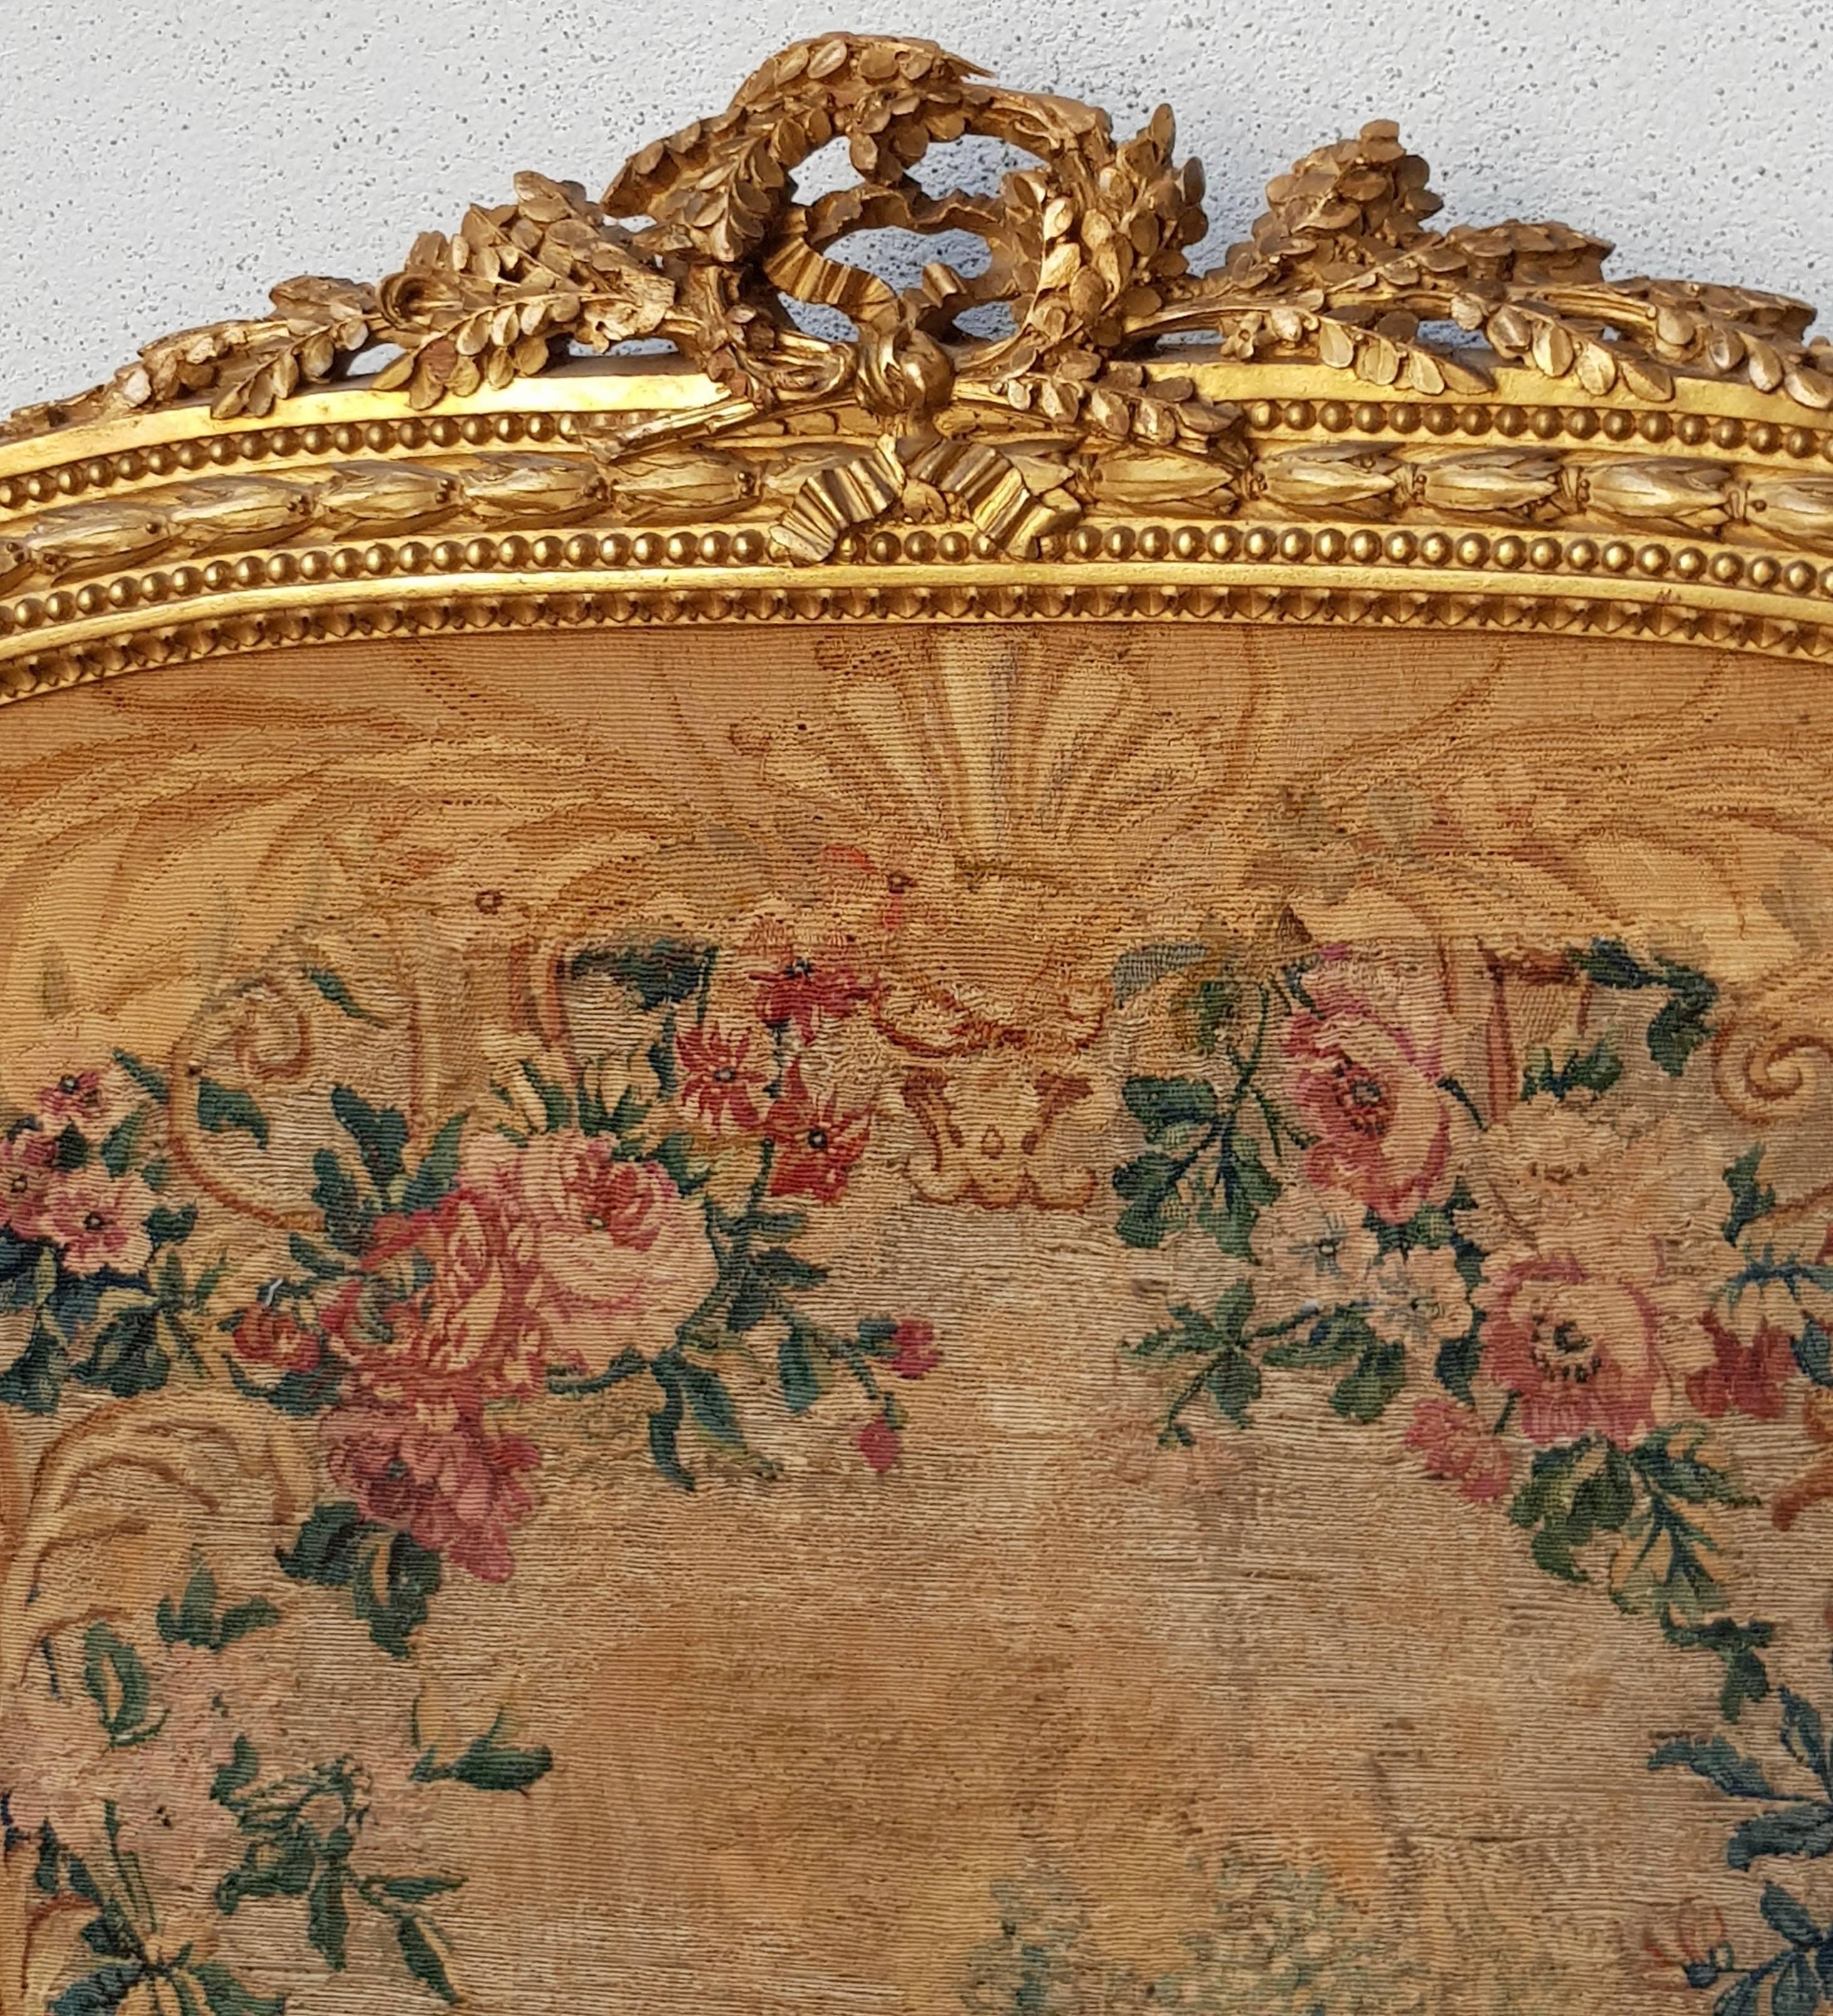 Late 19th Century 19th Century Aubusson Tapestry Panel in Original Giltwood Frame